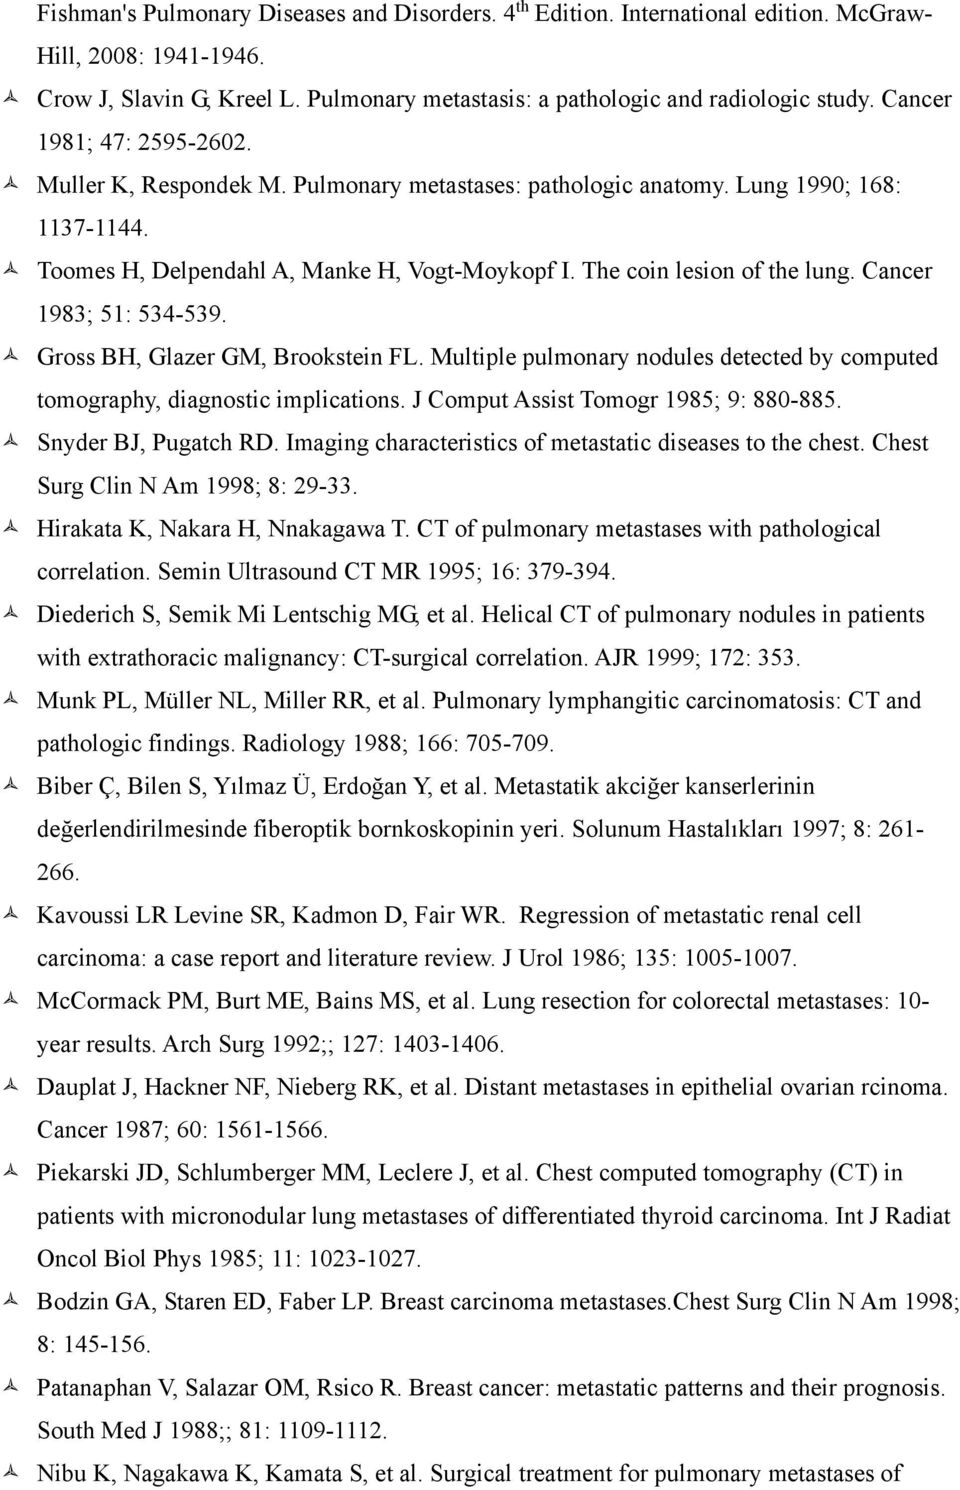 Cancer 1983; 51: 534-539. Gross BH, Glazer GM, Brookstein FL. Multiple pulmonary nodules detected by computed tomography, diagnostic implications. J Comput Assist Tomogr 1985; 9: 880-885.